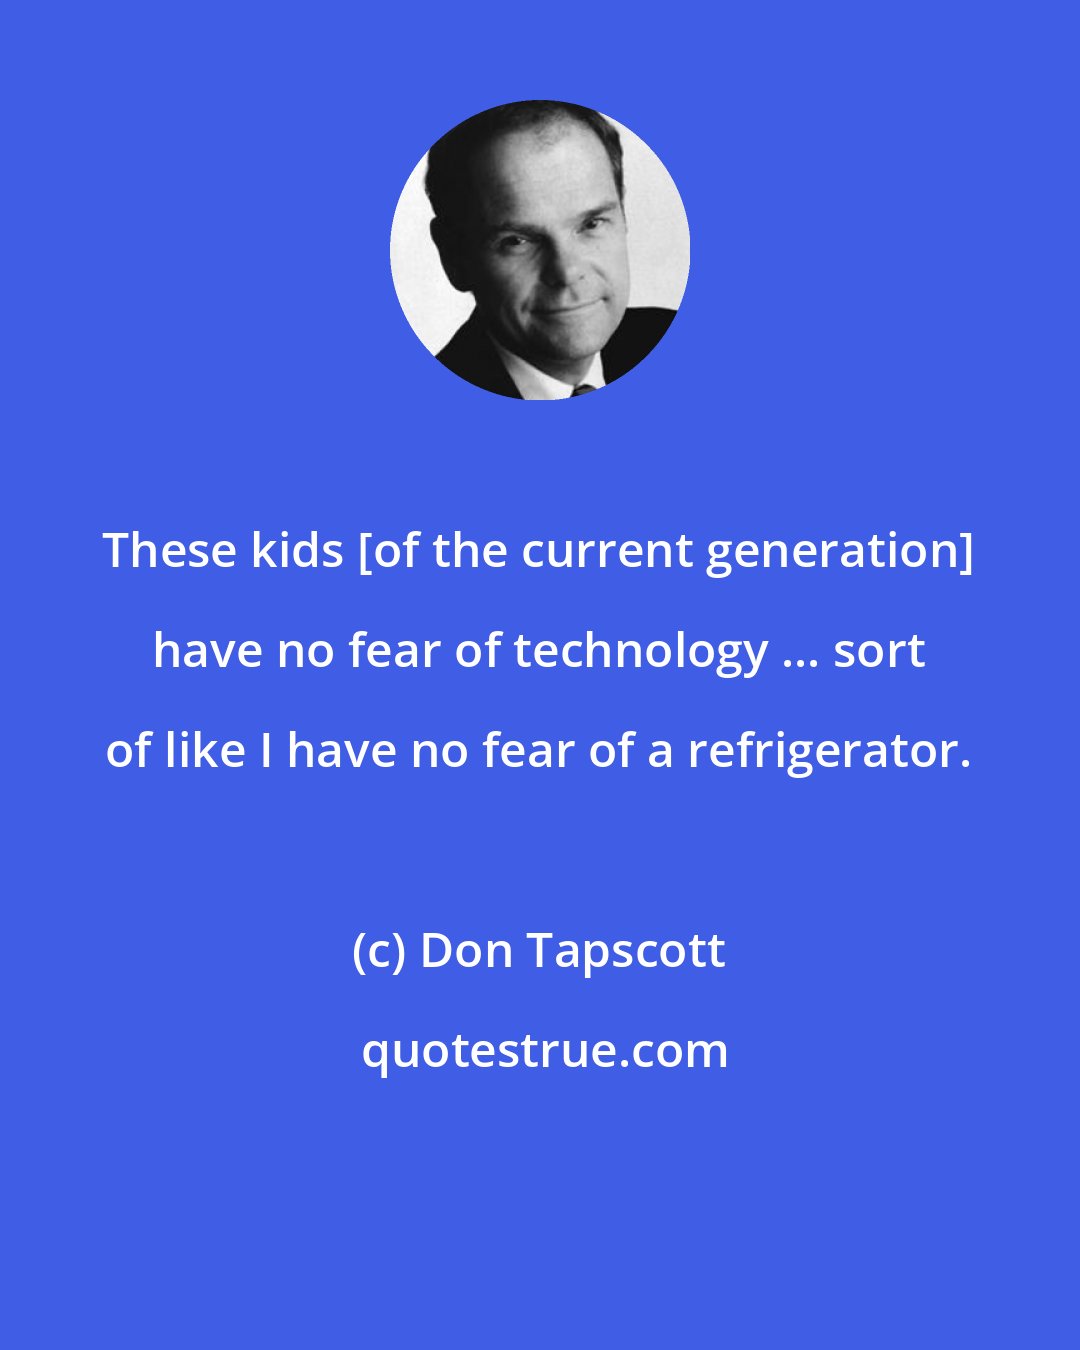 Don Tapscott: These kids [of the current generation] have no fear of technology ... sort of like I have no fear of a refrigerator.